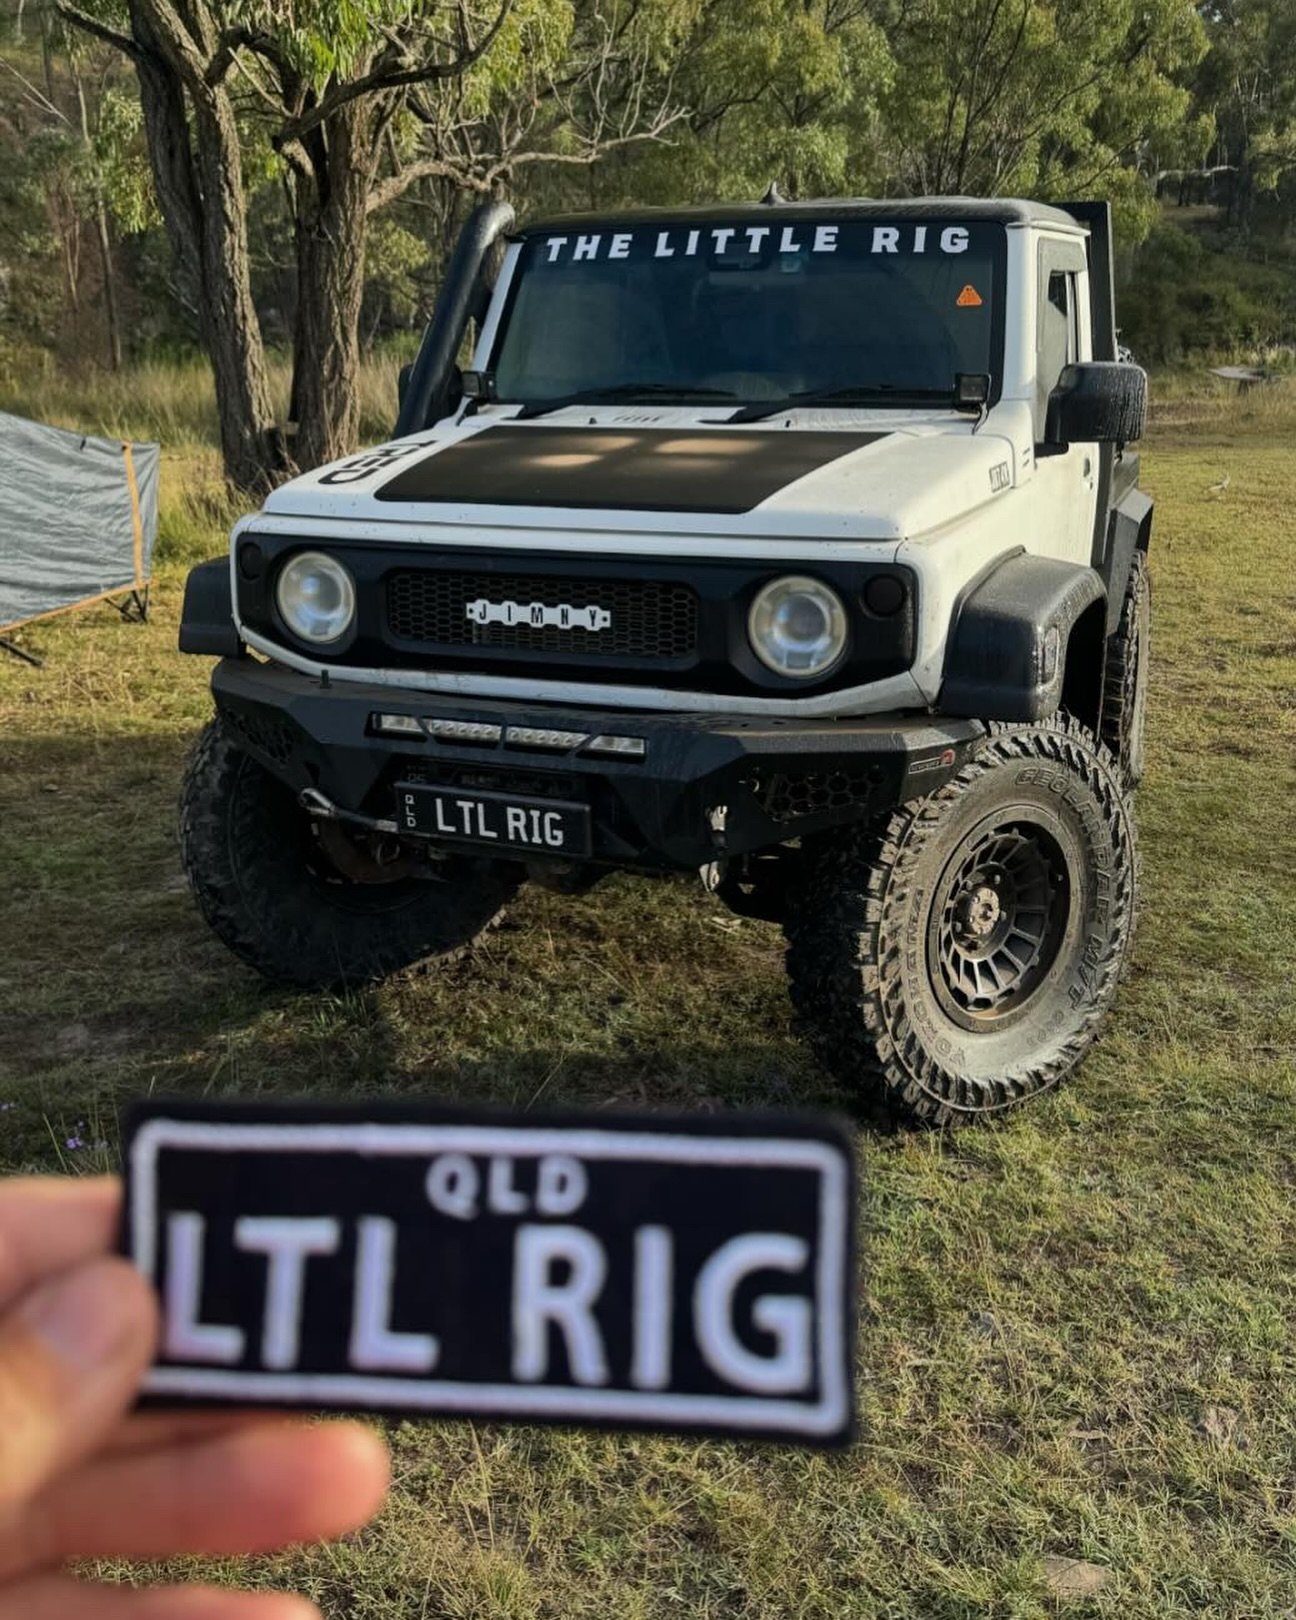 Thanks for sharing @the_little_rig 👌 our patch matches the rig SO WELL (if I do say so myself)